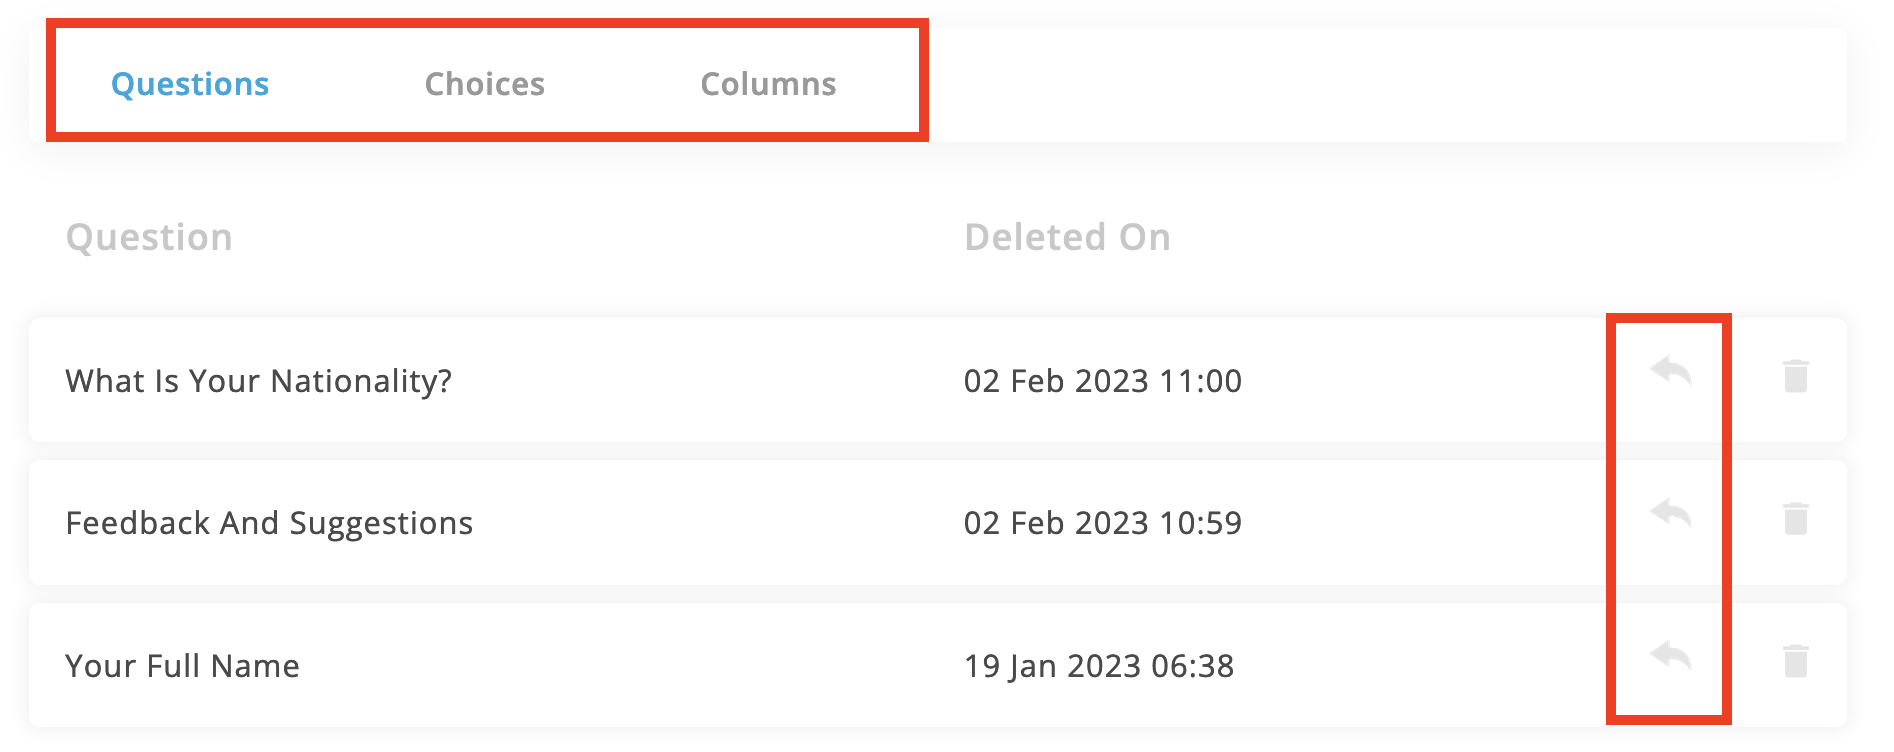 You can restore deleted questions, choices and columns